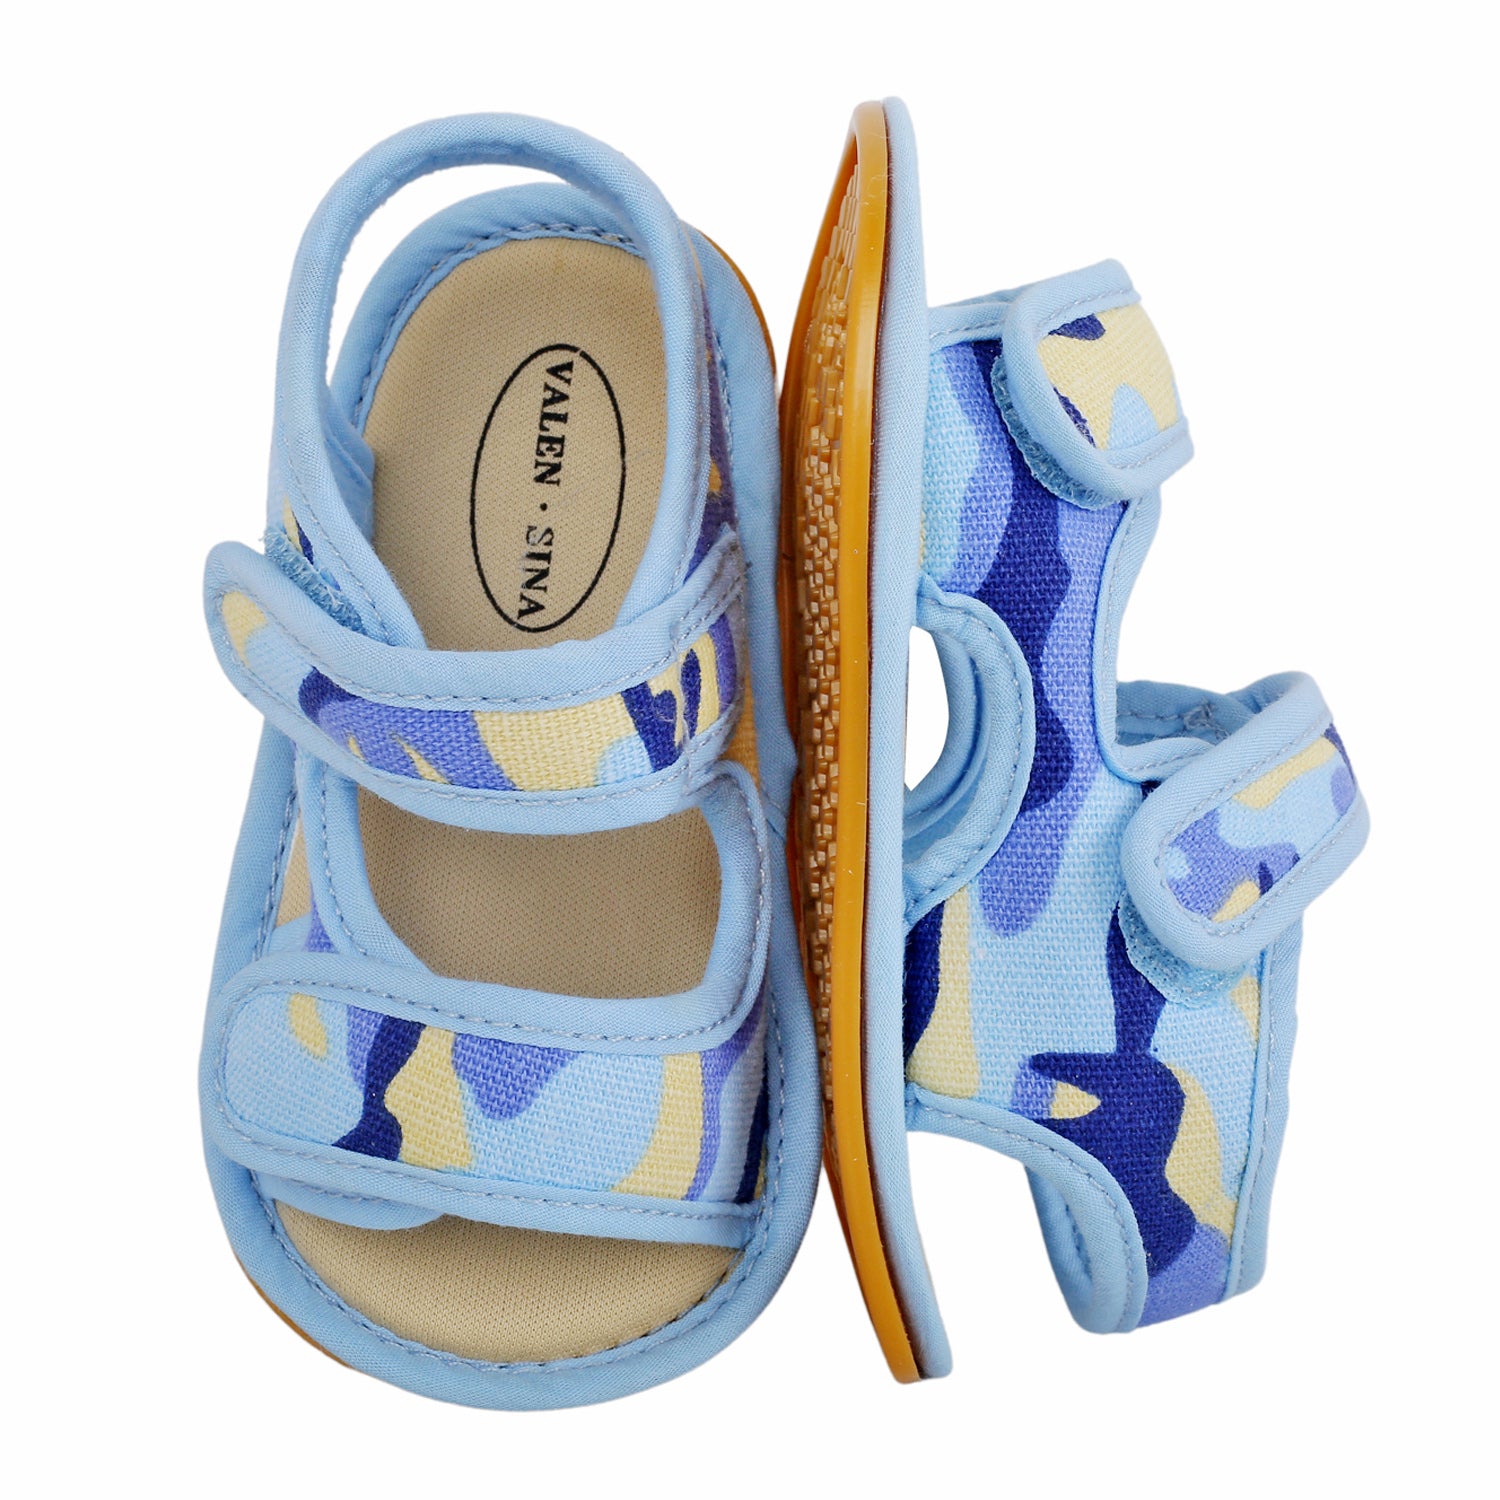 Baby Moo Camouflage Print Blue Open Toe Sandals - Baby Moo